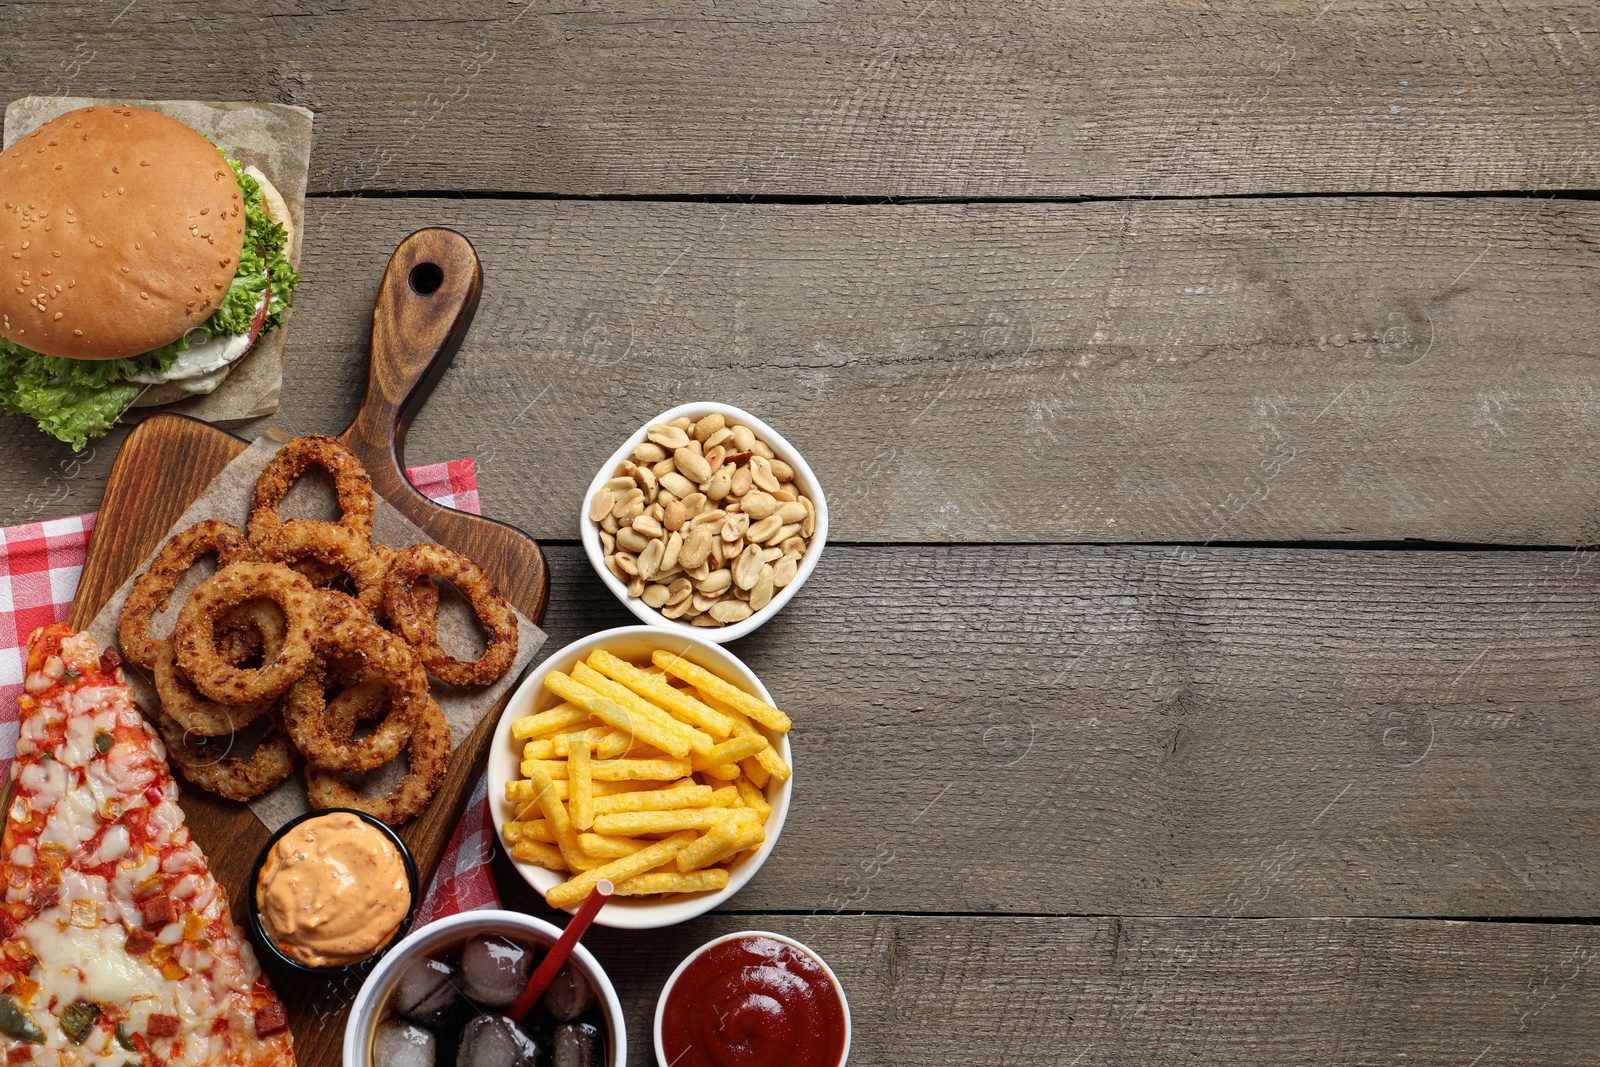 Photo of French fries, onion rings and other fast food on wooden table, flat lay with space for text